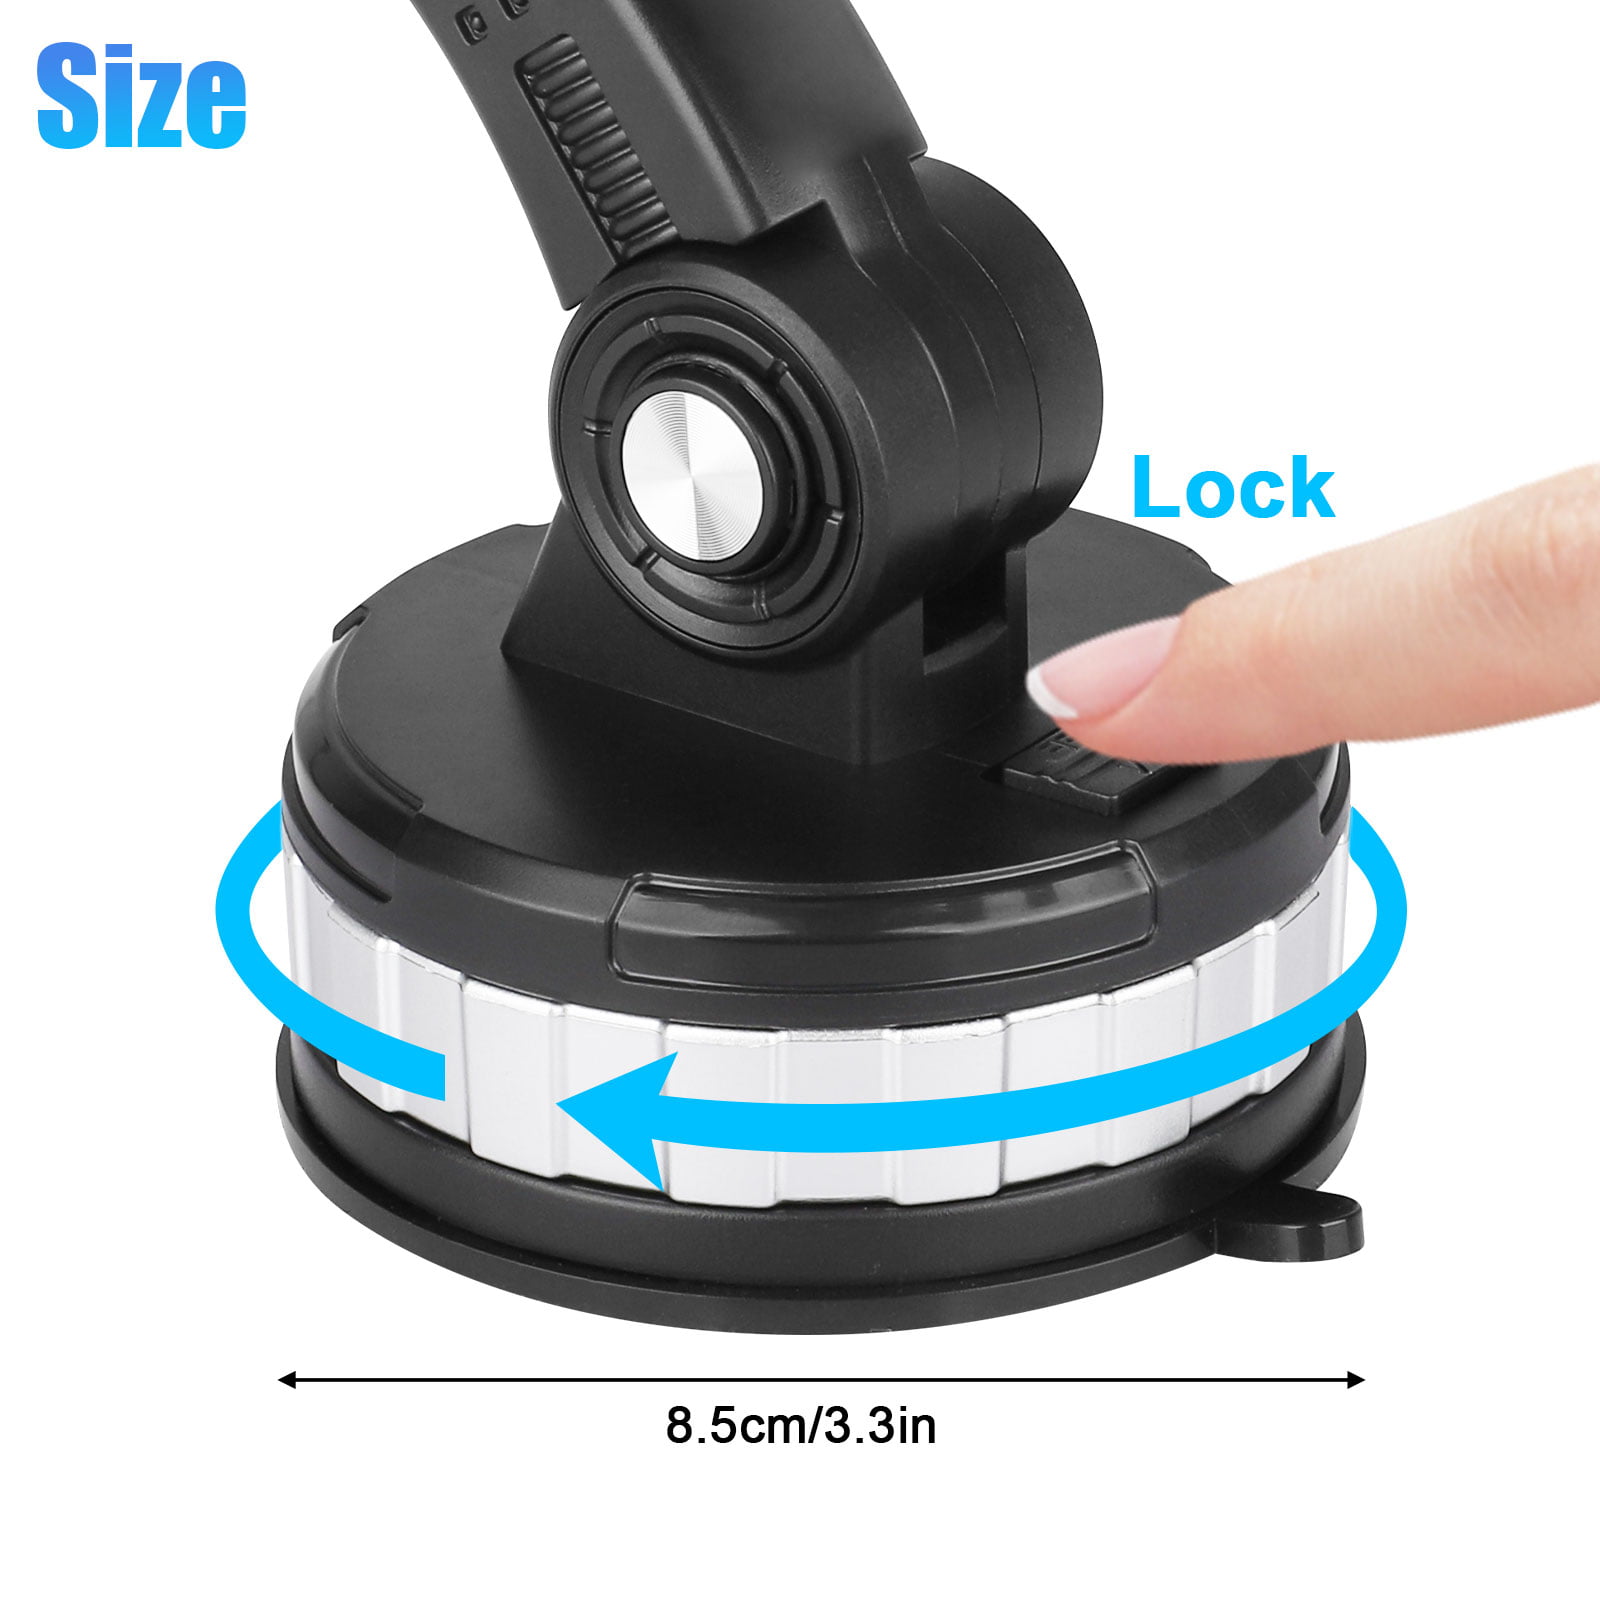 TSV Phone Holder for Car, Suction Cup Phone Mount, Universal Car Mount 360° Adjustable  Gooseneck Holder Cradle Stand Fit for iPhone 13, 12 Mini, 11 Pro Max,  Samsung Note20 Ultra, S20+ 